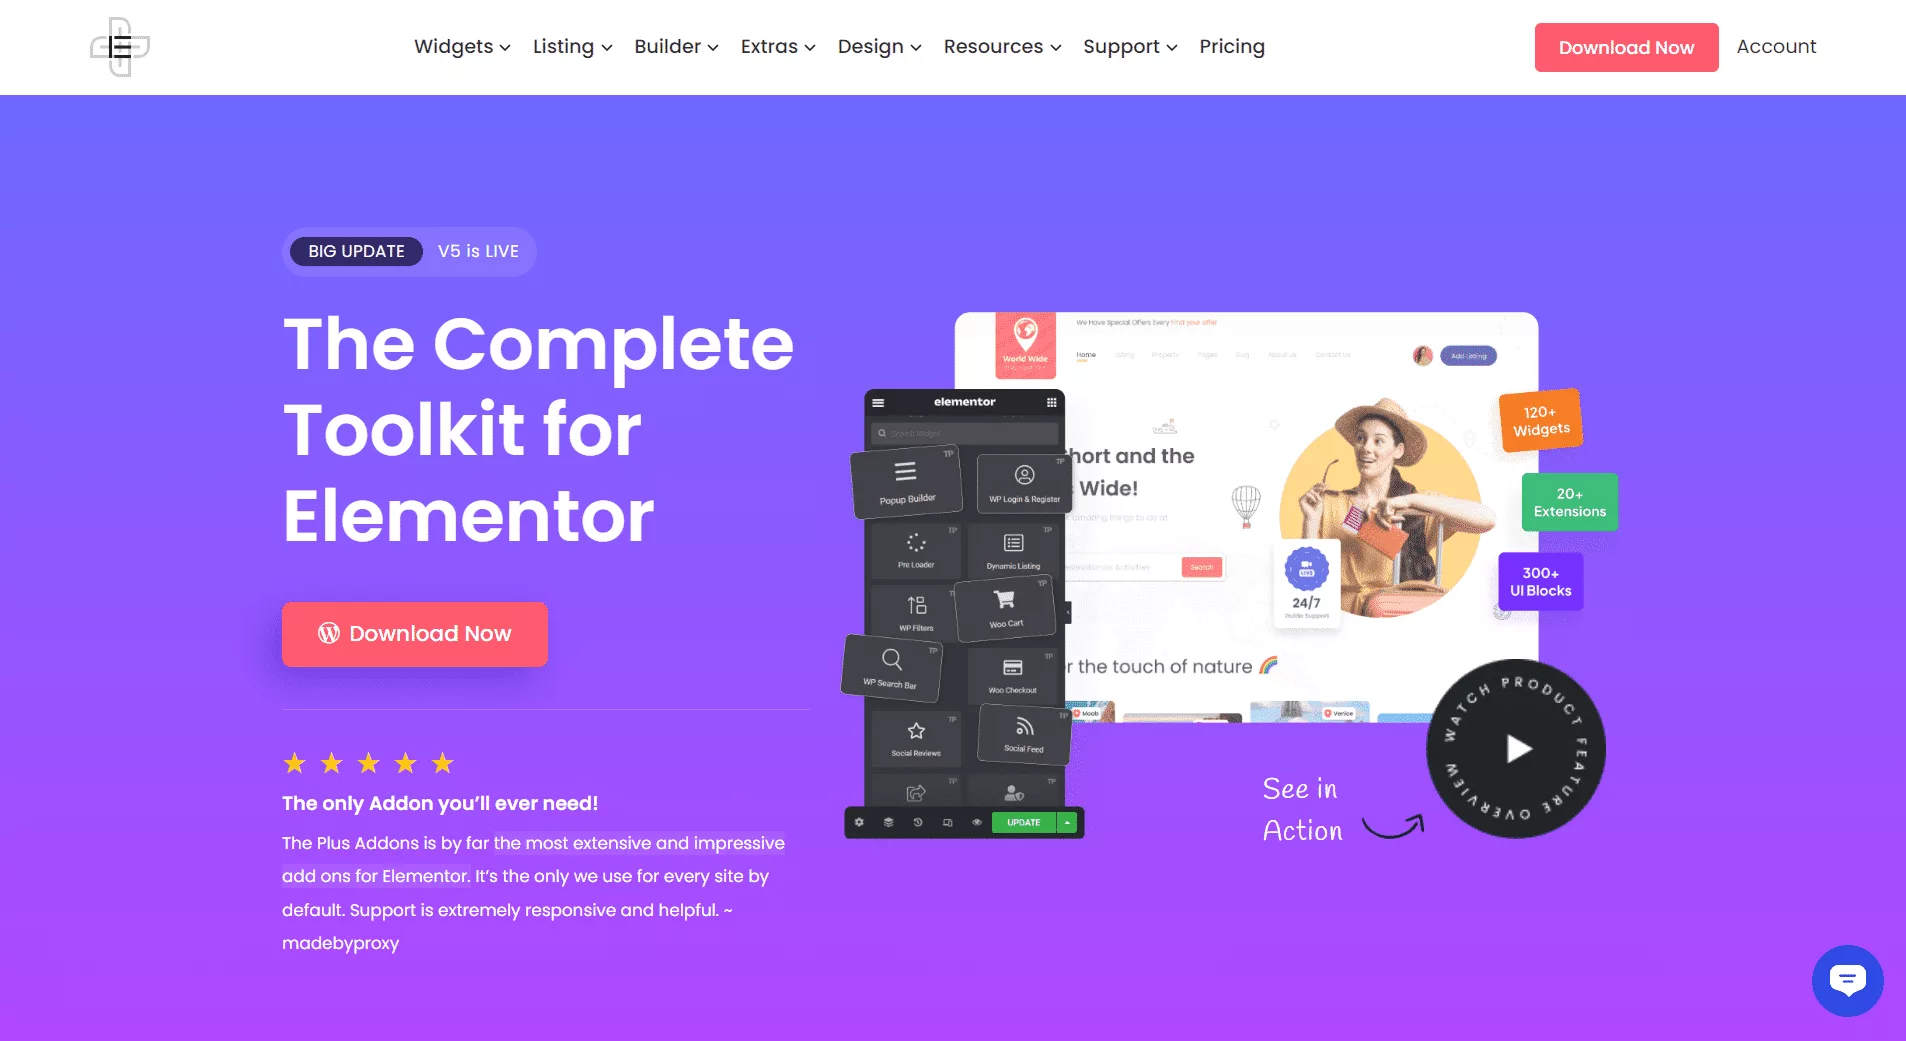 The plus addons for elementor the plus addons for elementor vs unlimited elements for elementor: 25+ feature comparisons from the plus addons for elementor